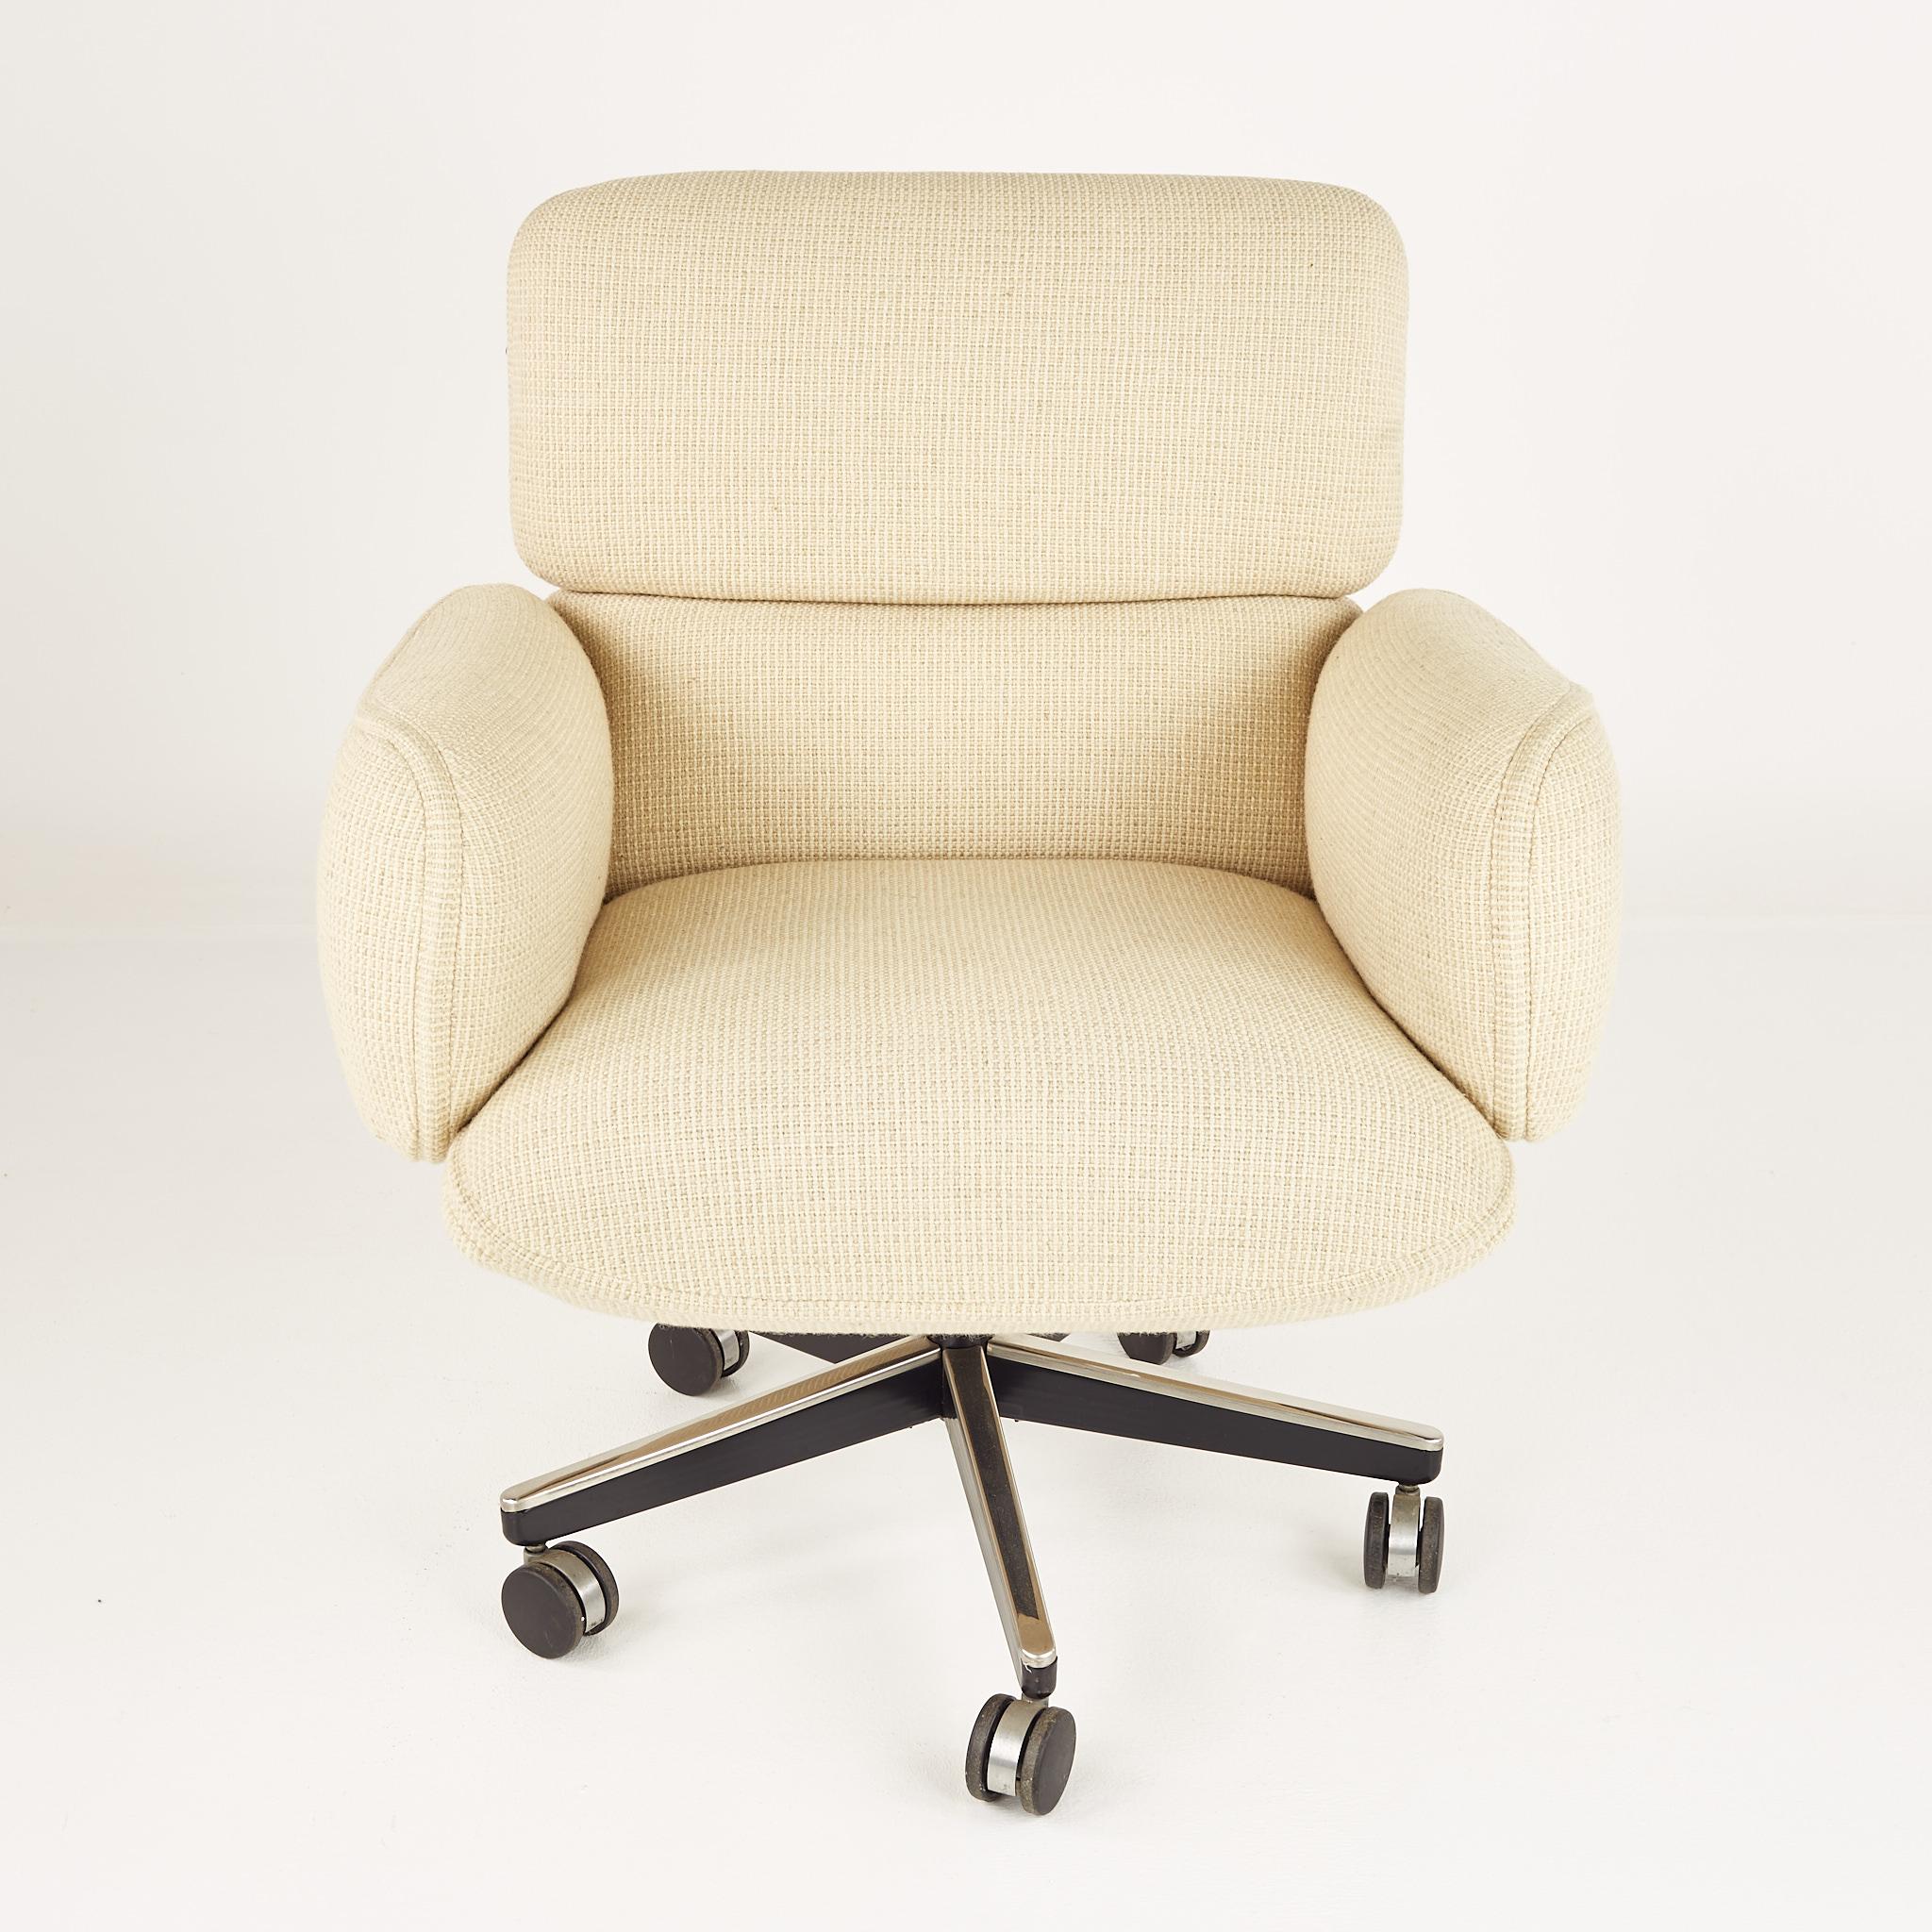 Otto Zapf for Knoll mid century upholstered office chair

This chair measure: 30 wide x 27 deep x 35 inches high, with a seat height of 19 and arm height of 25.5 inches

?All pieces of furniture can be had in what we call restored vintage